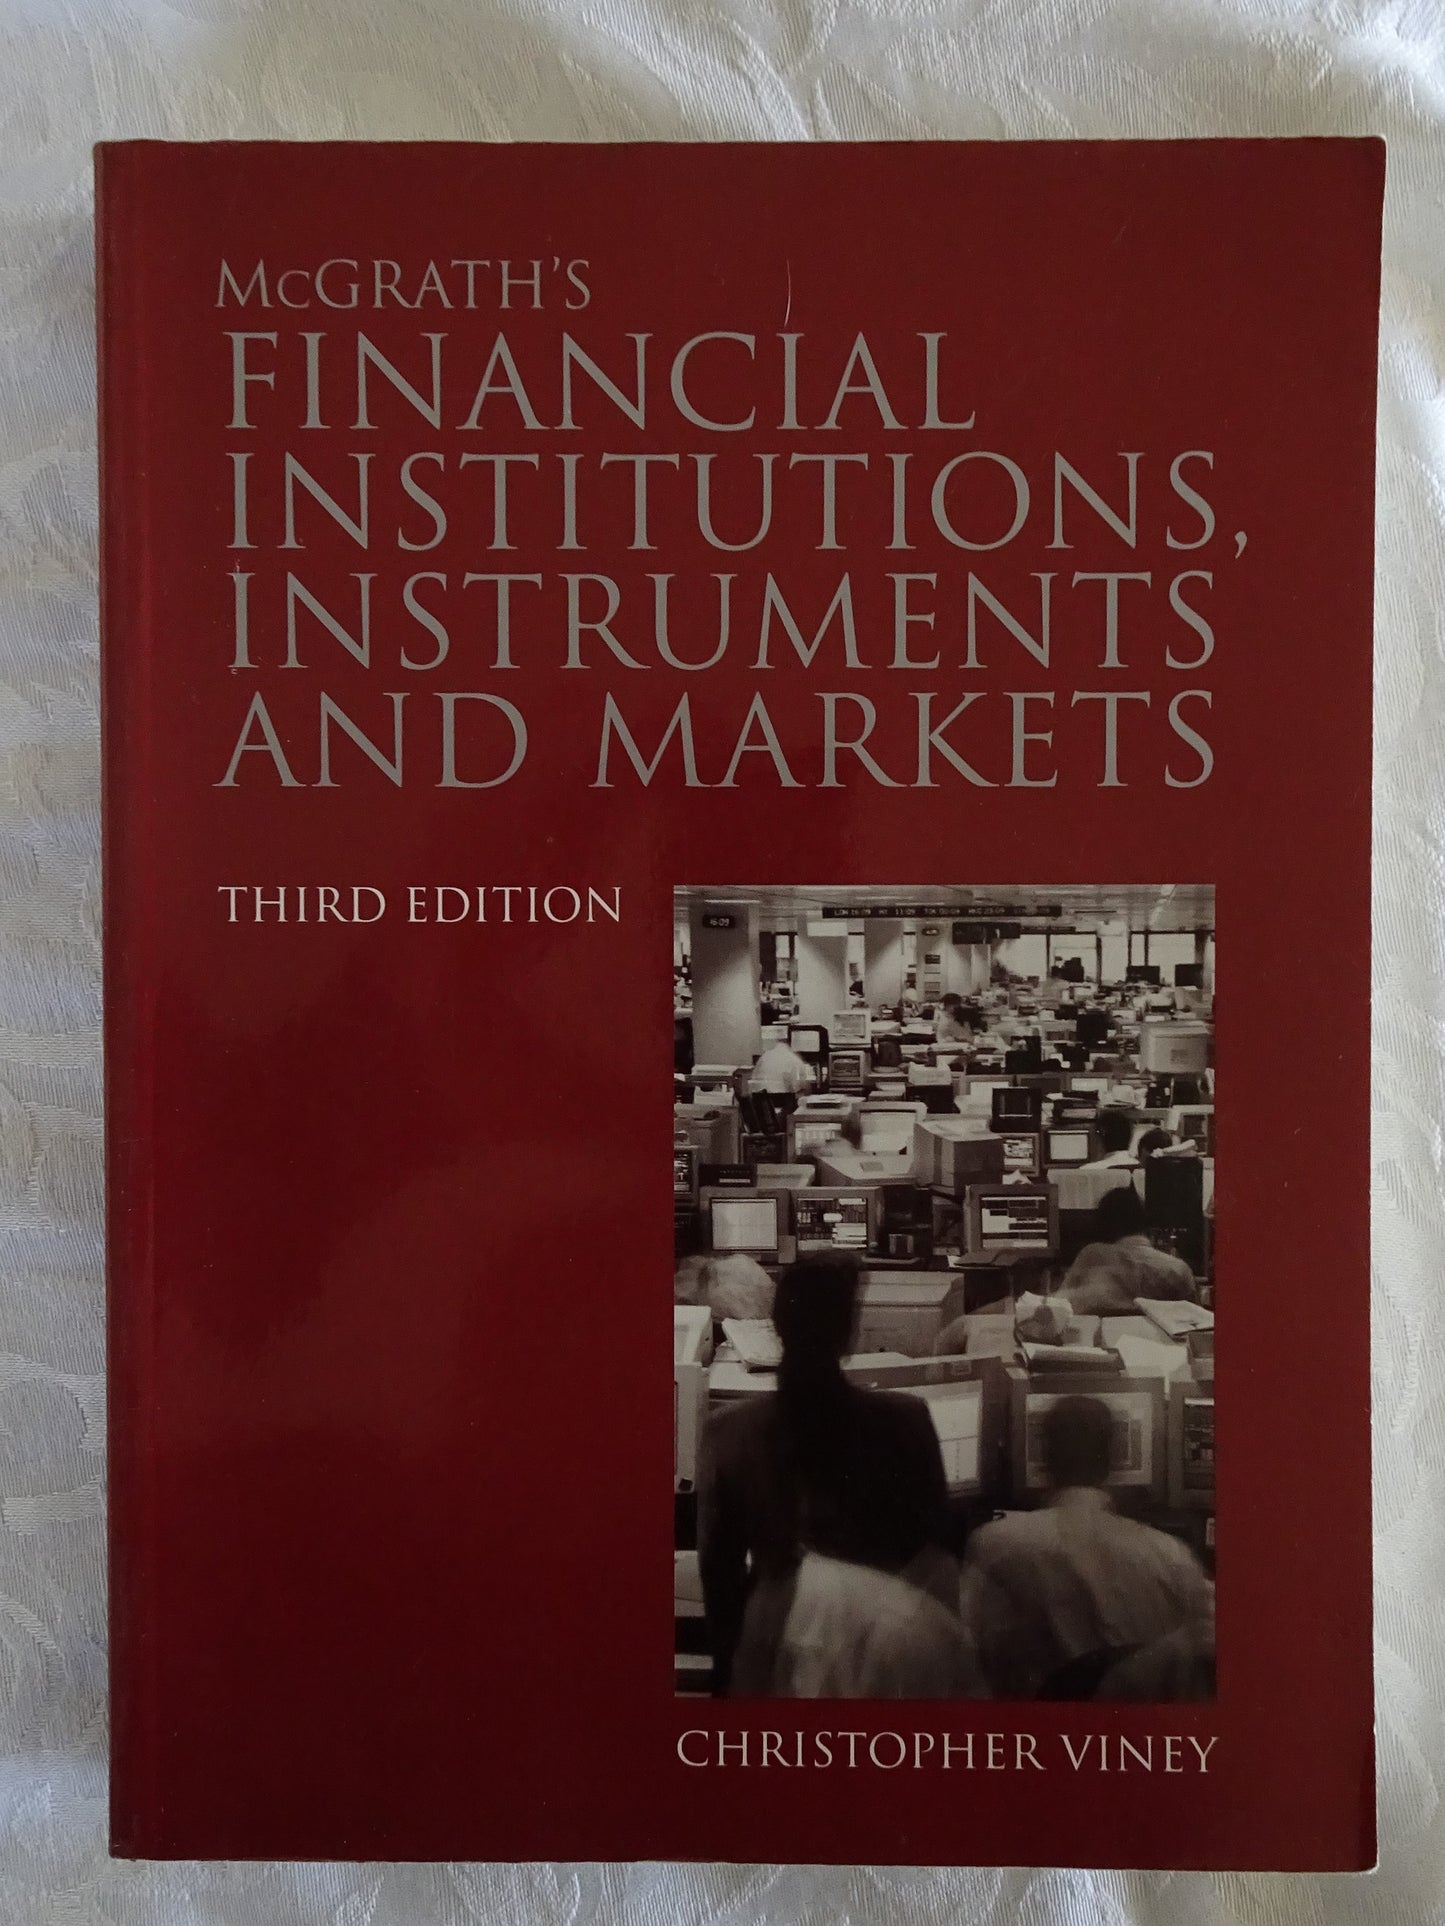 McGrath's Financial Institutions, Instruments and Markets by Christopher Viney